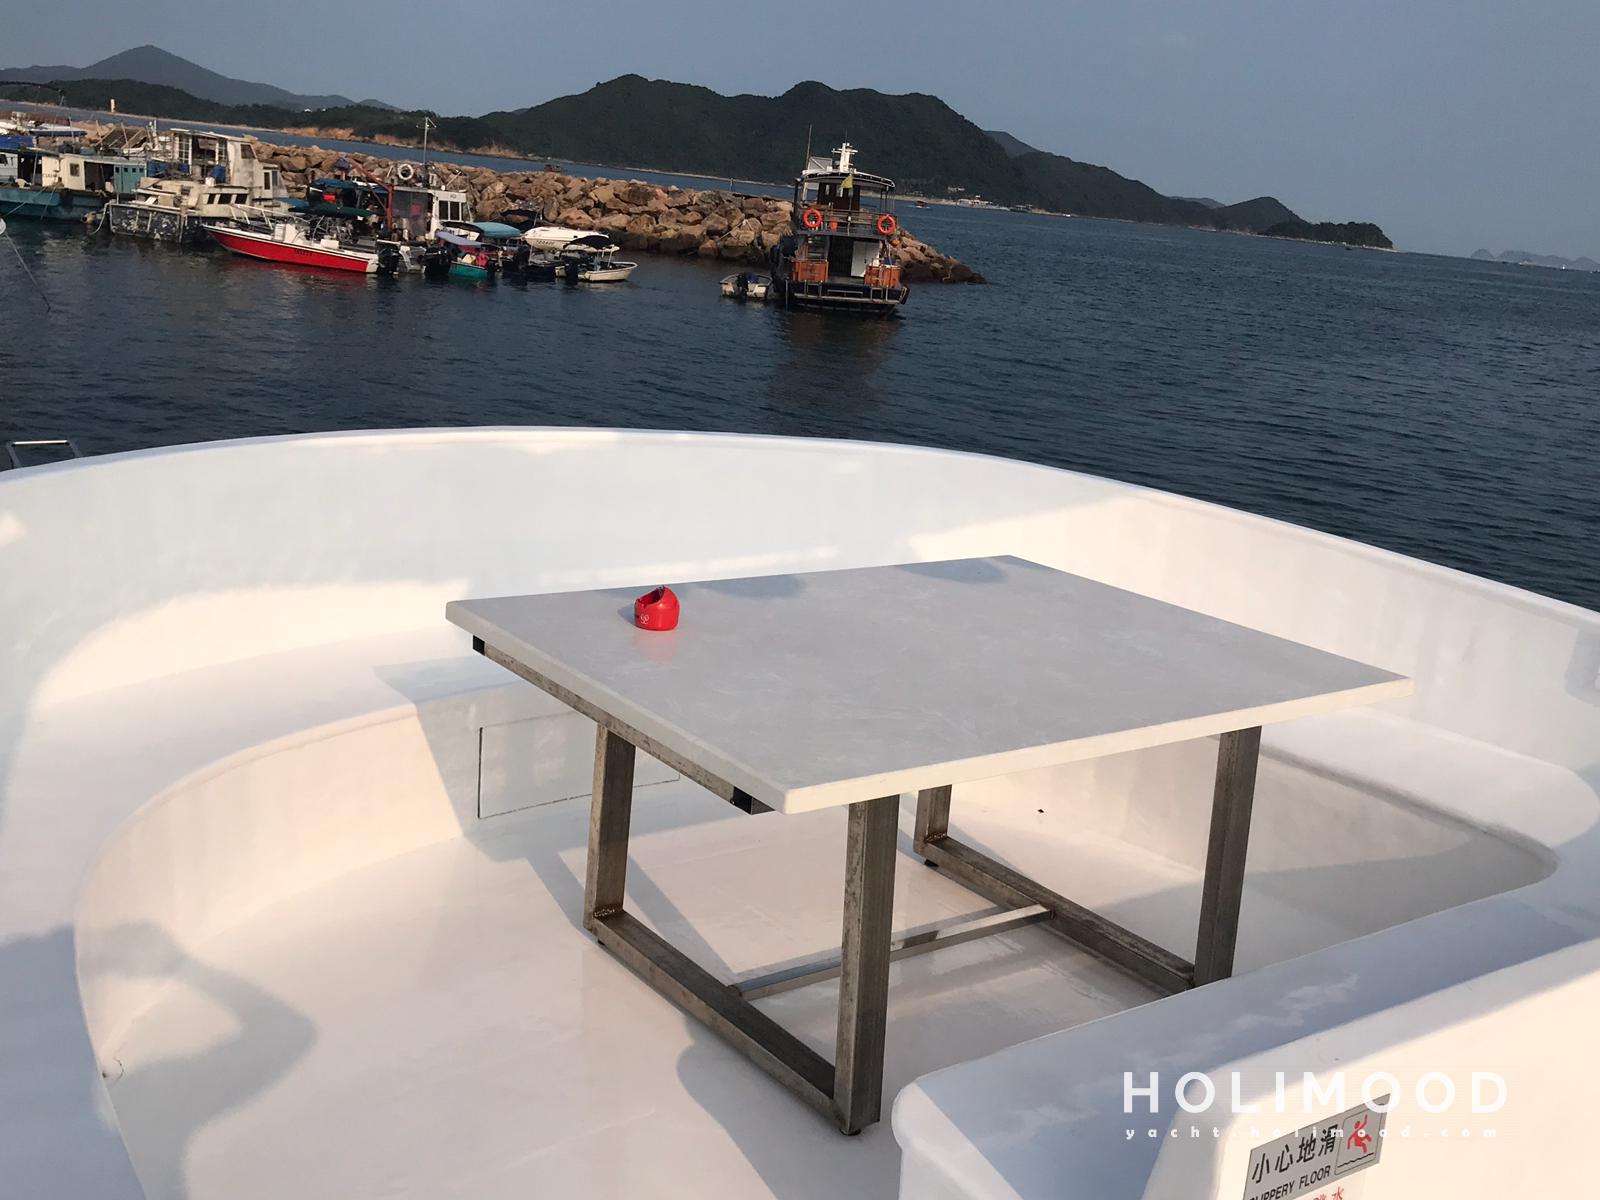 HG01 Sai Kung Squid Fishing Experience with Delicious Dinner 8